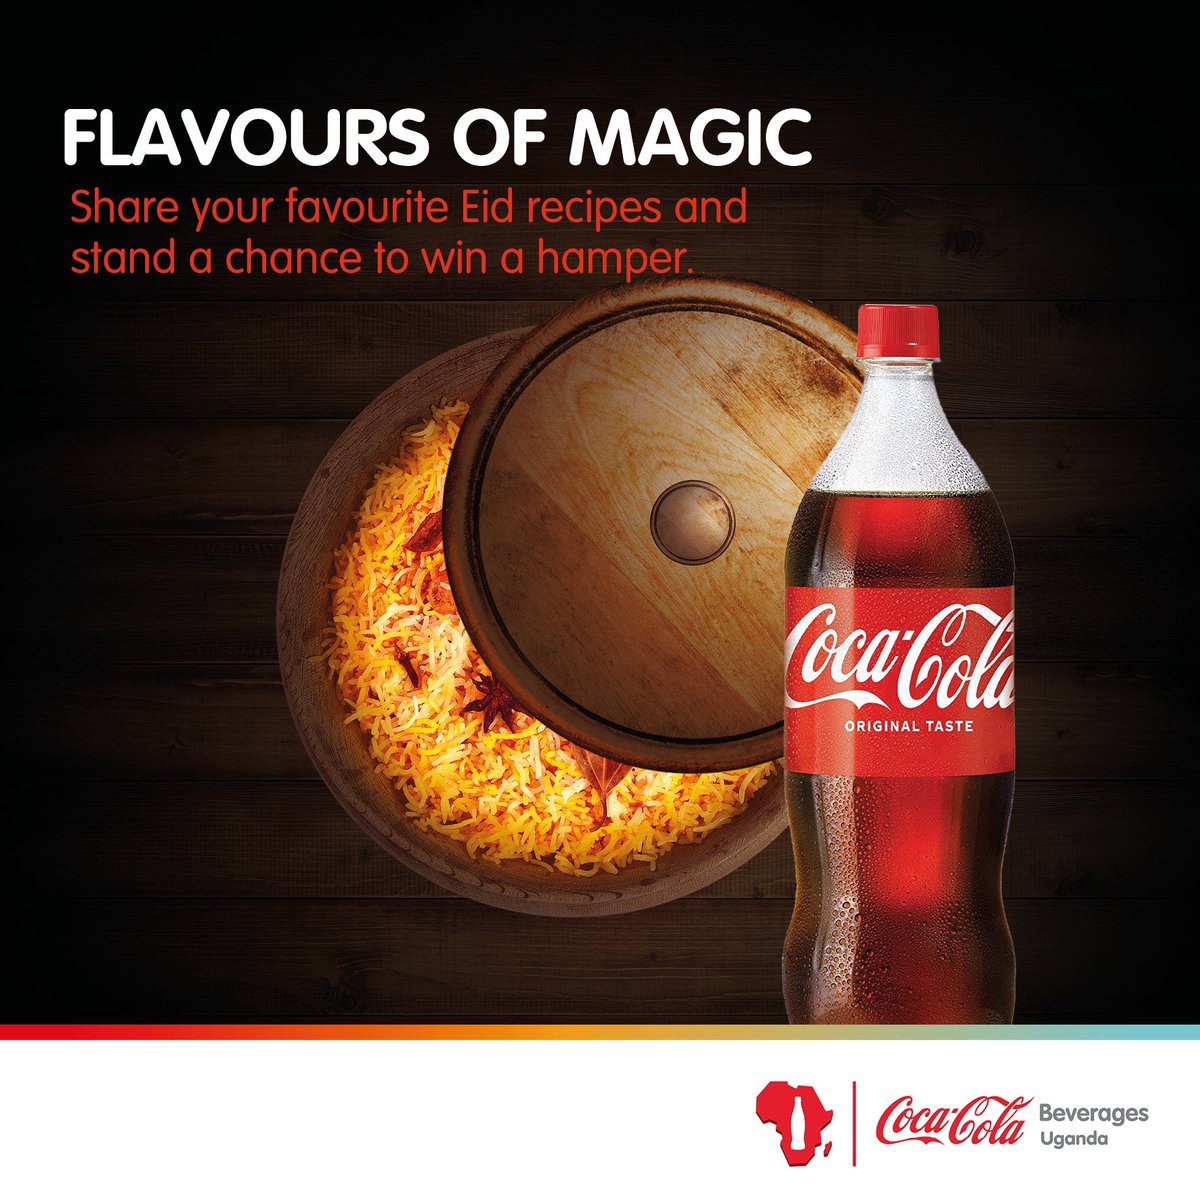 If you’ve been fasting, you have a recipe that’s on your mind! Share your favorite Eid recipe in the comments below and stand a chance to win a hamper from us. Use the hashtag #FlavorsOfMagic. #RefreshUG #CCBU